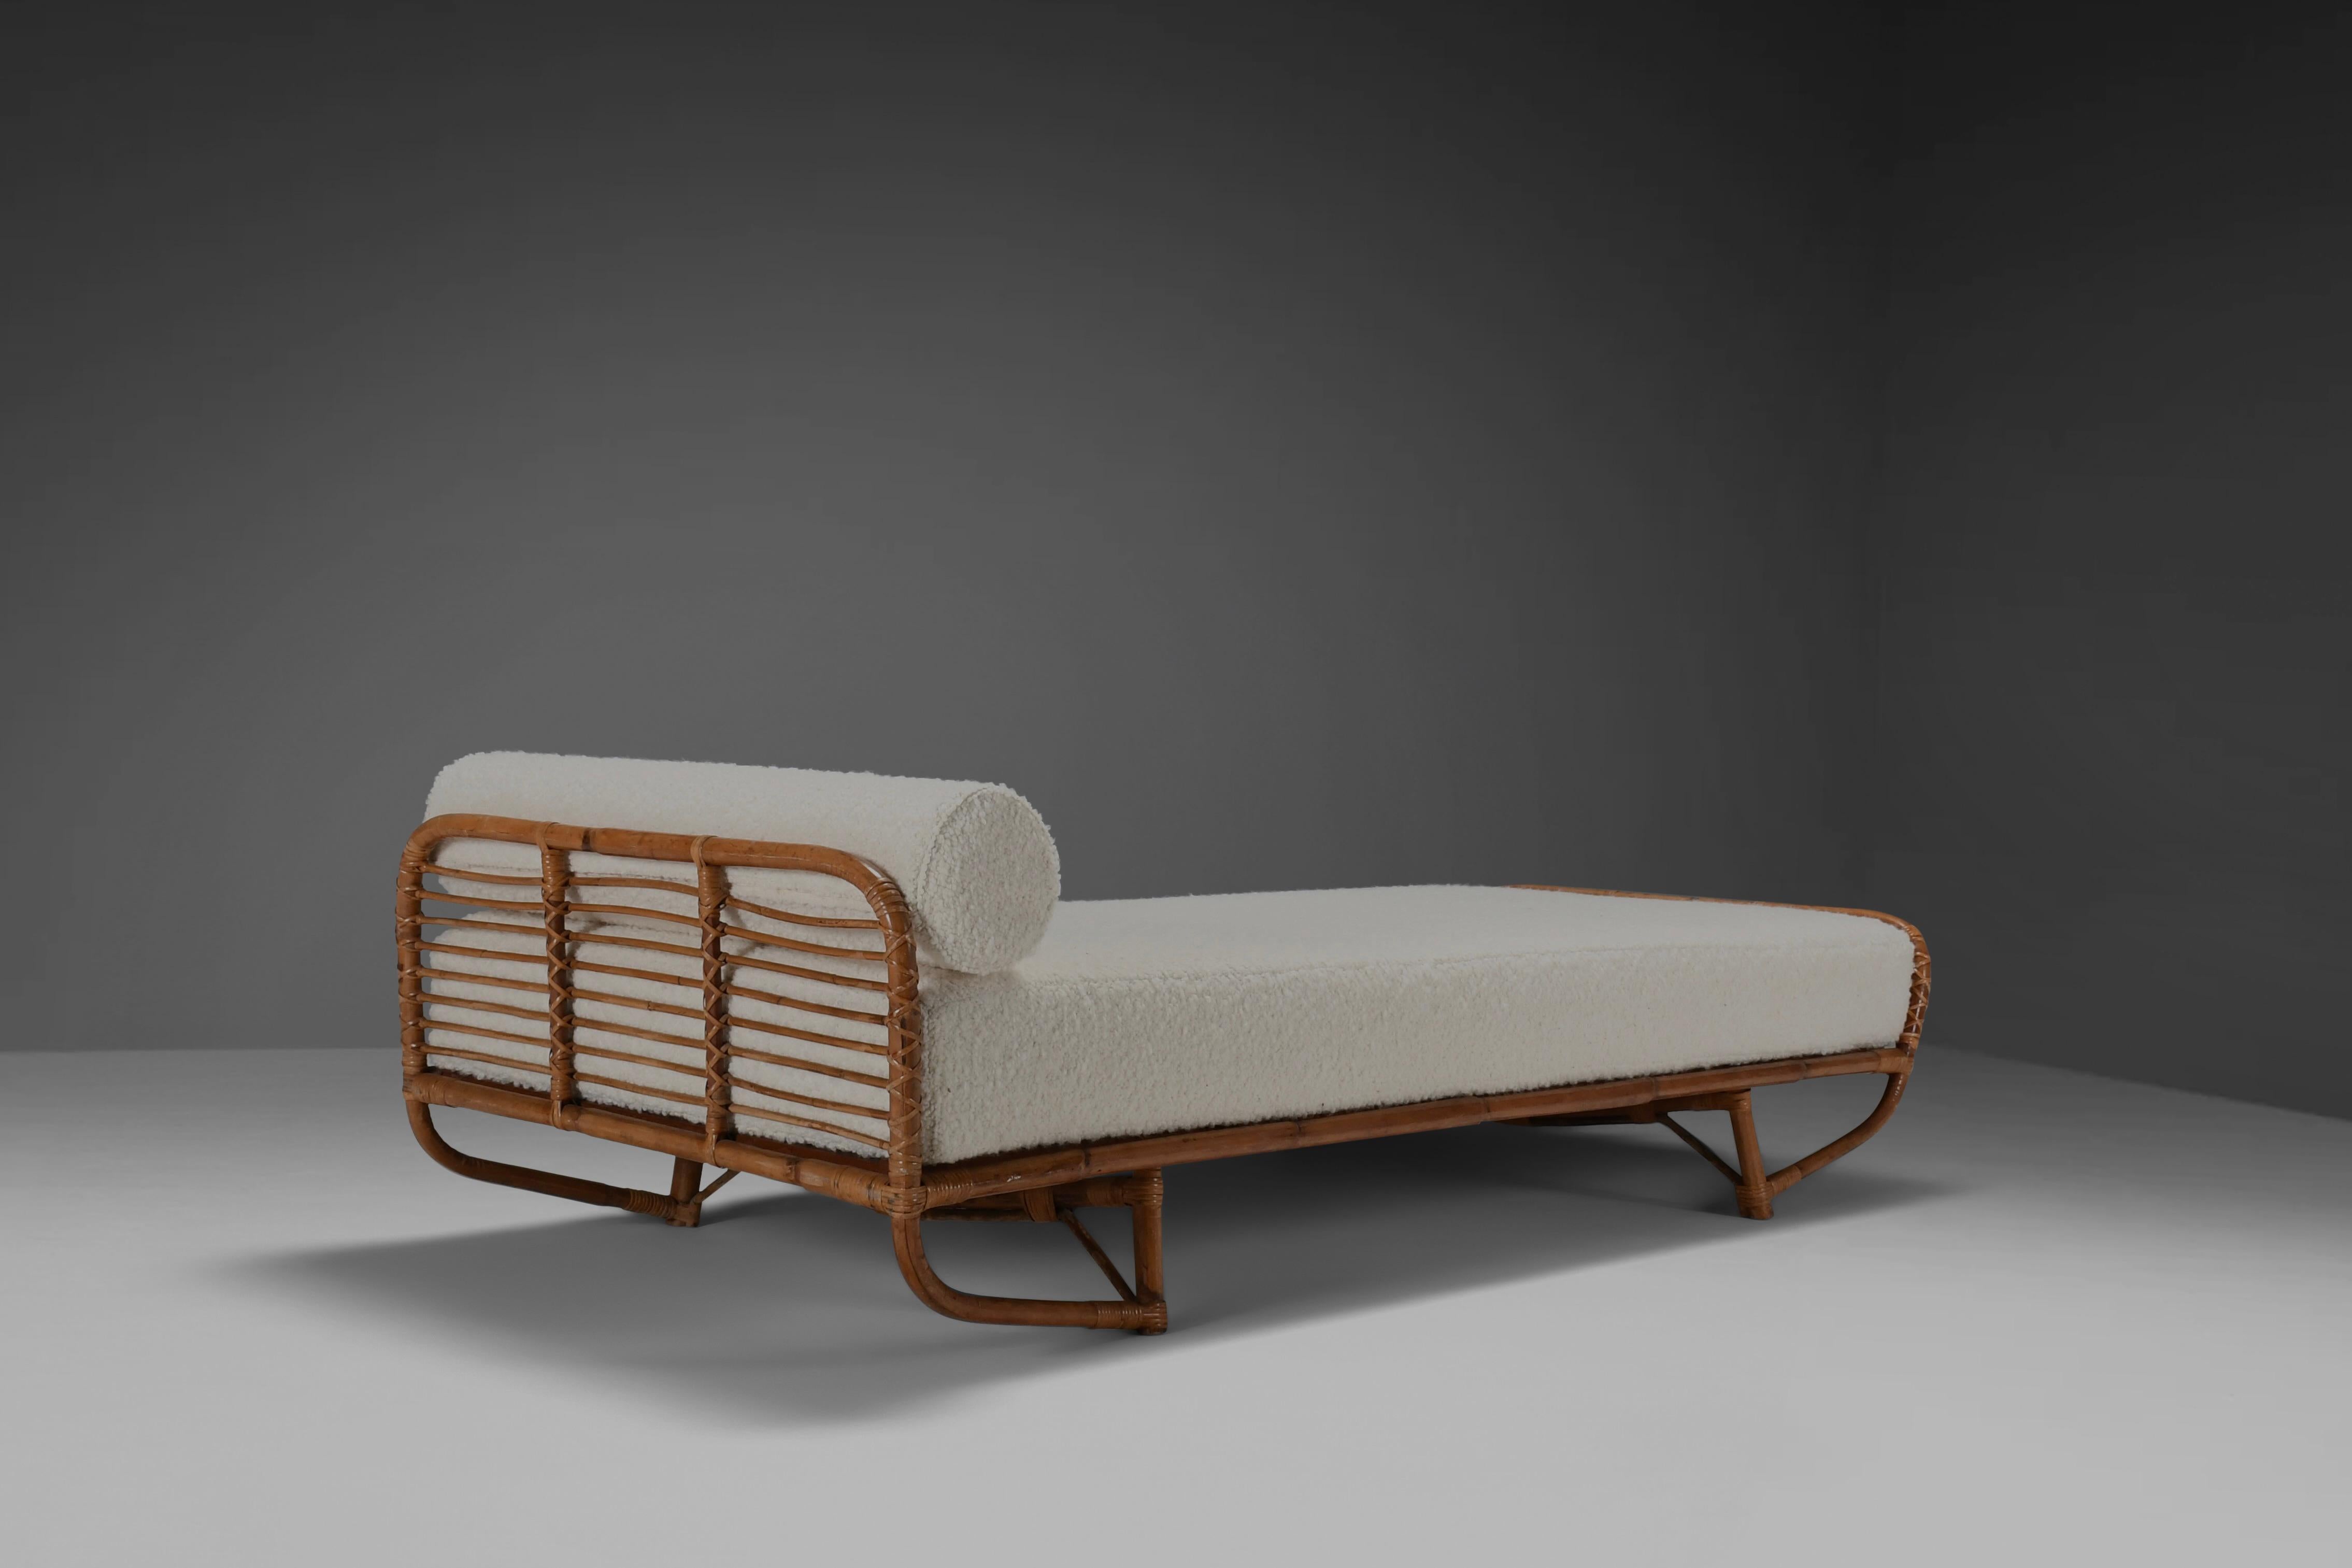 Beautiful high quality daybed in very good condition.

Two available. 

This exquisite midcentury daybed is handmade using the highest standards of quality and craftsmanship

It is woven with bamboo and rattan, the new custom mattress and bolster